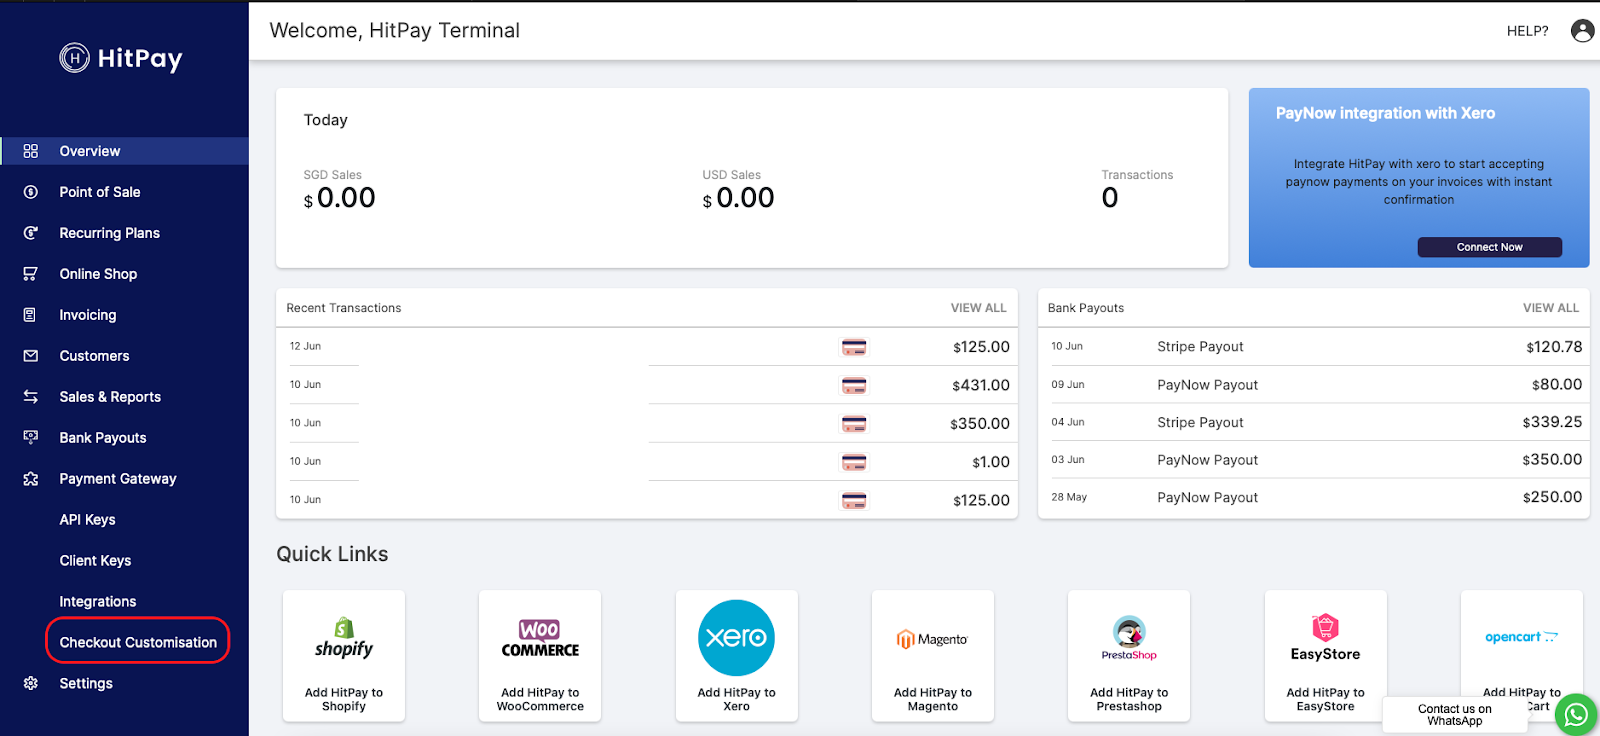 Where to find Checkout Customisation in the HitPay dashboard